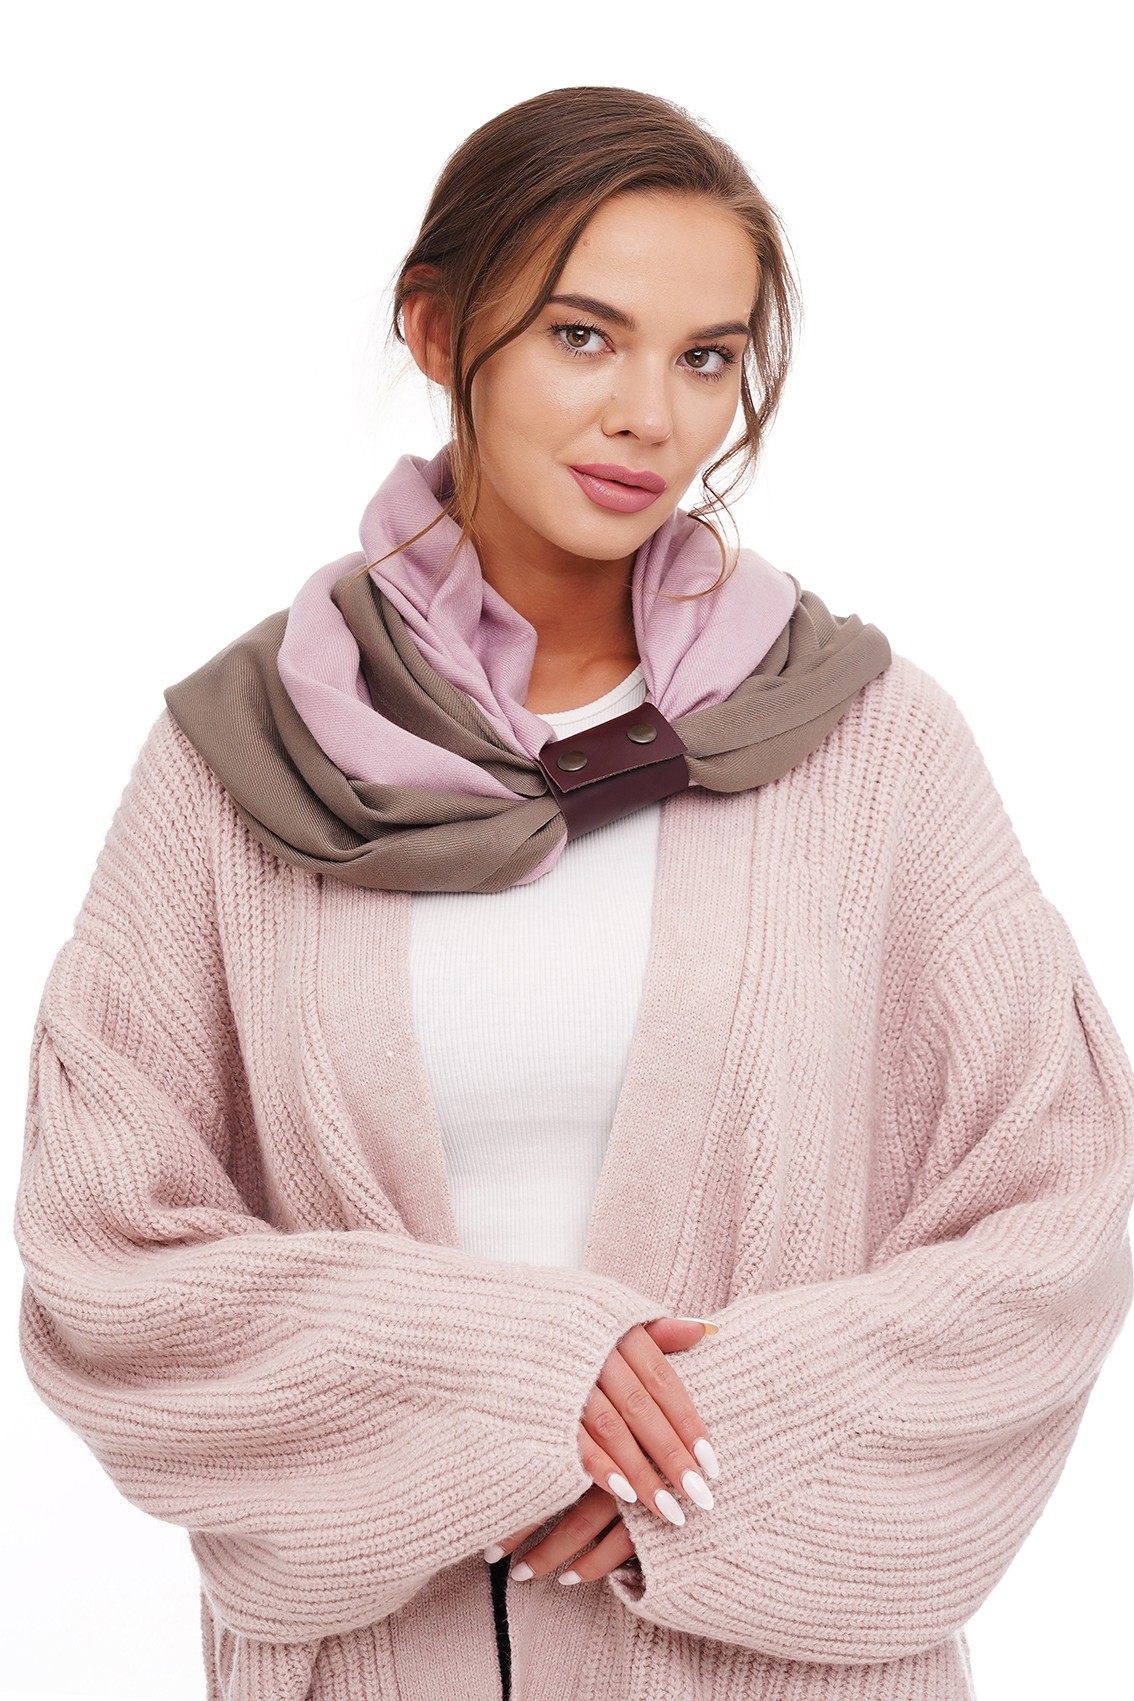 Cashmere scarf pink cappuccino "Milan", scarf snood, winter women's scarf, large women's scarf